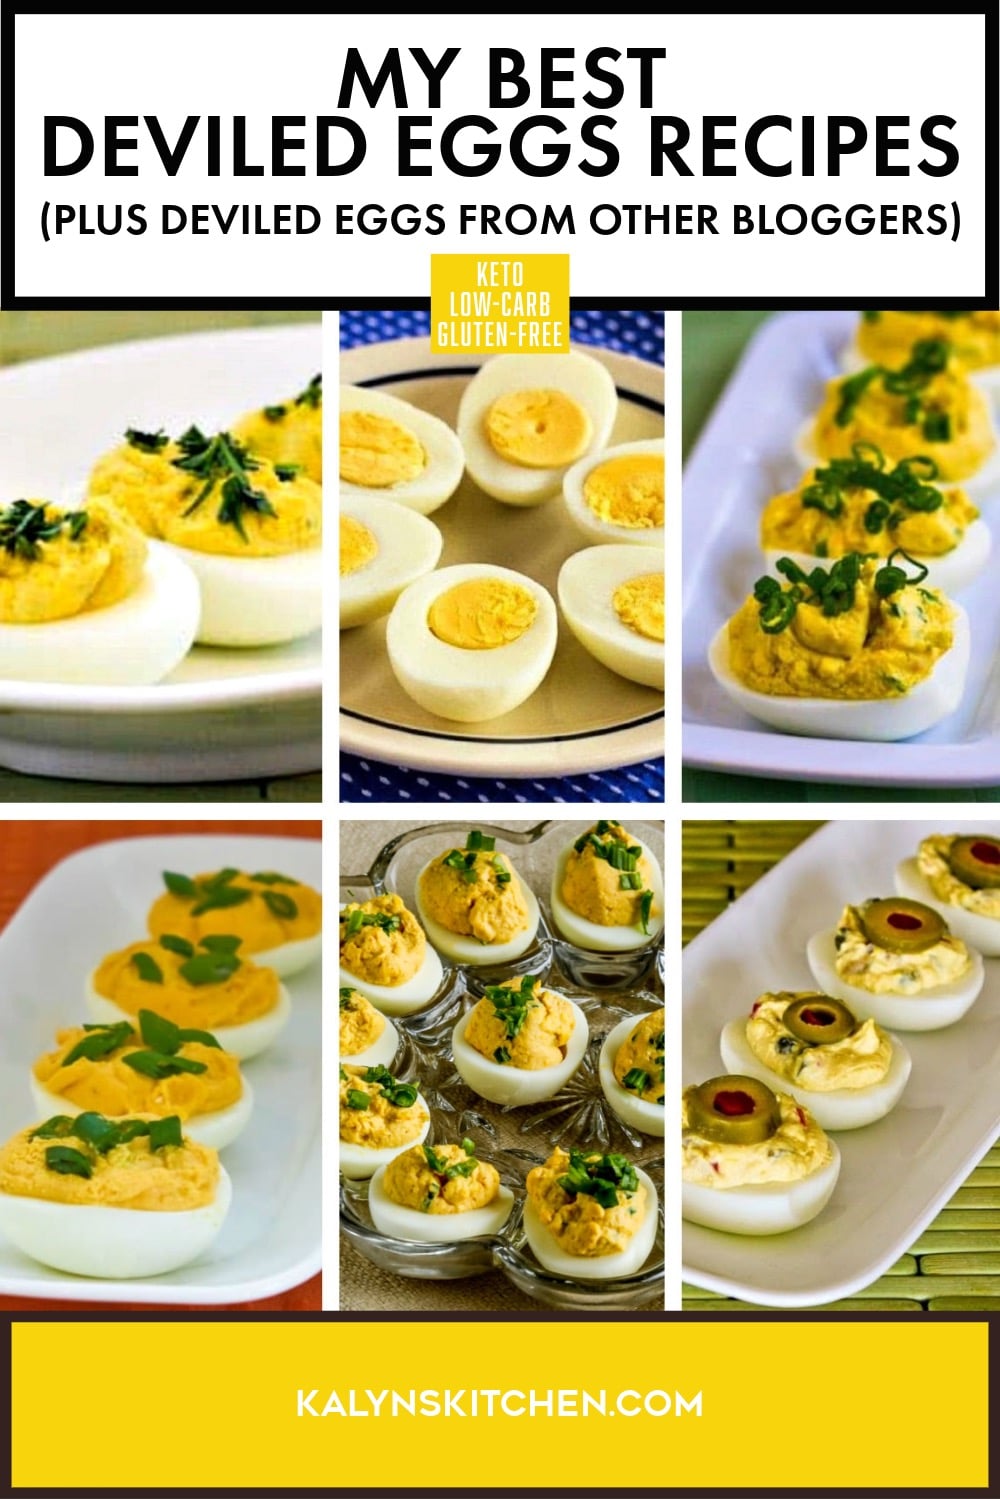 Pinterest image of My Best Deviled Eggs Recipes (plus Deviled Eggs from other Bloggers)